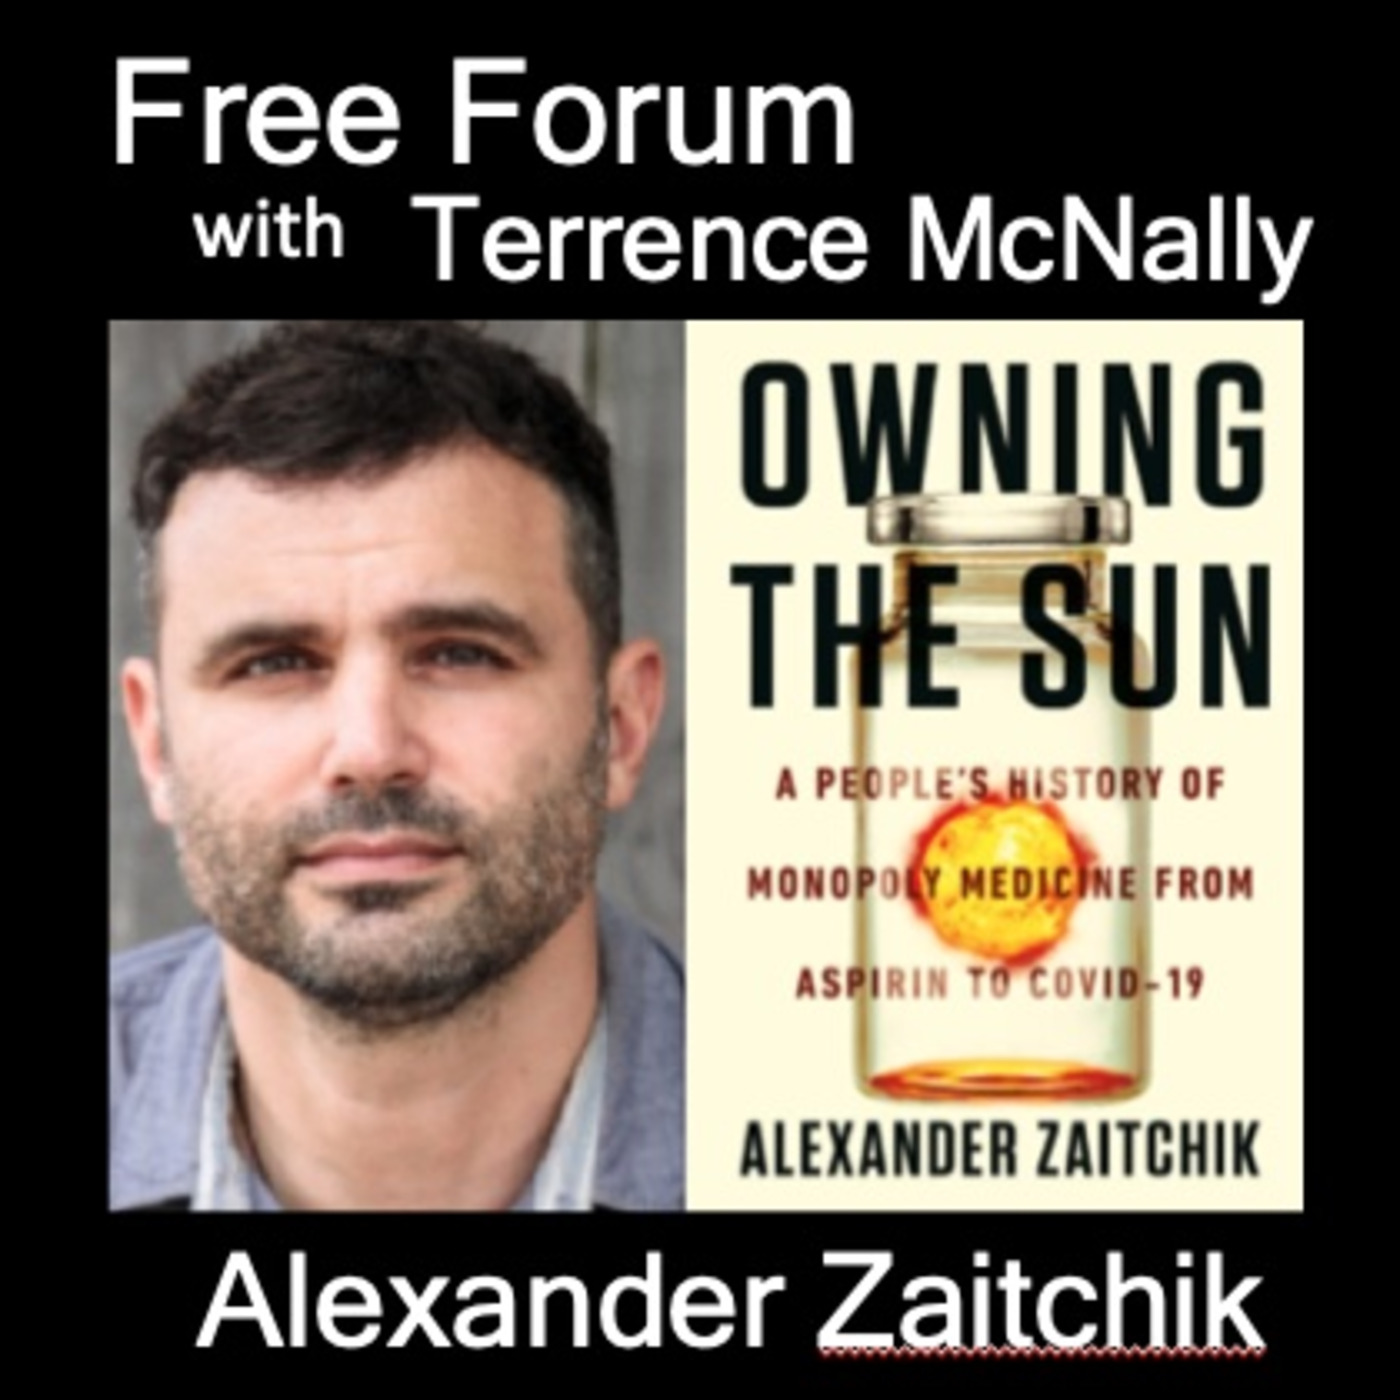 Episode 582: Taxpayers fund drug research. Corporations reap obscene profits from “our” discoveries. ALEXANDER ZAITCHIK, OWNING THE SUN:A People’s History of Monopoly Medicine